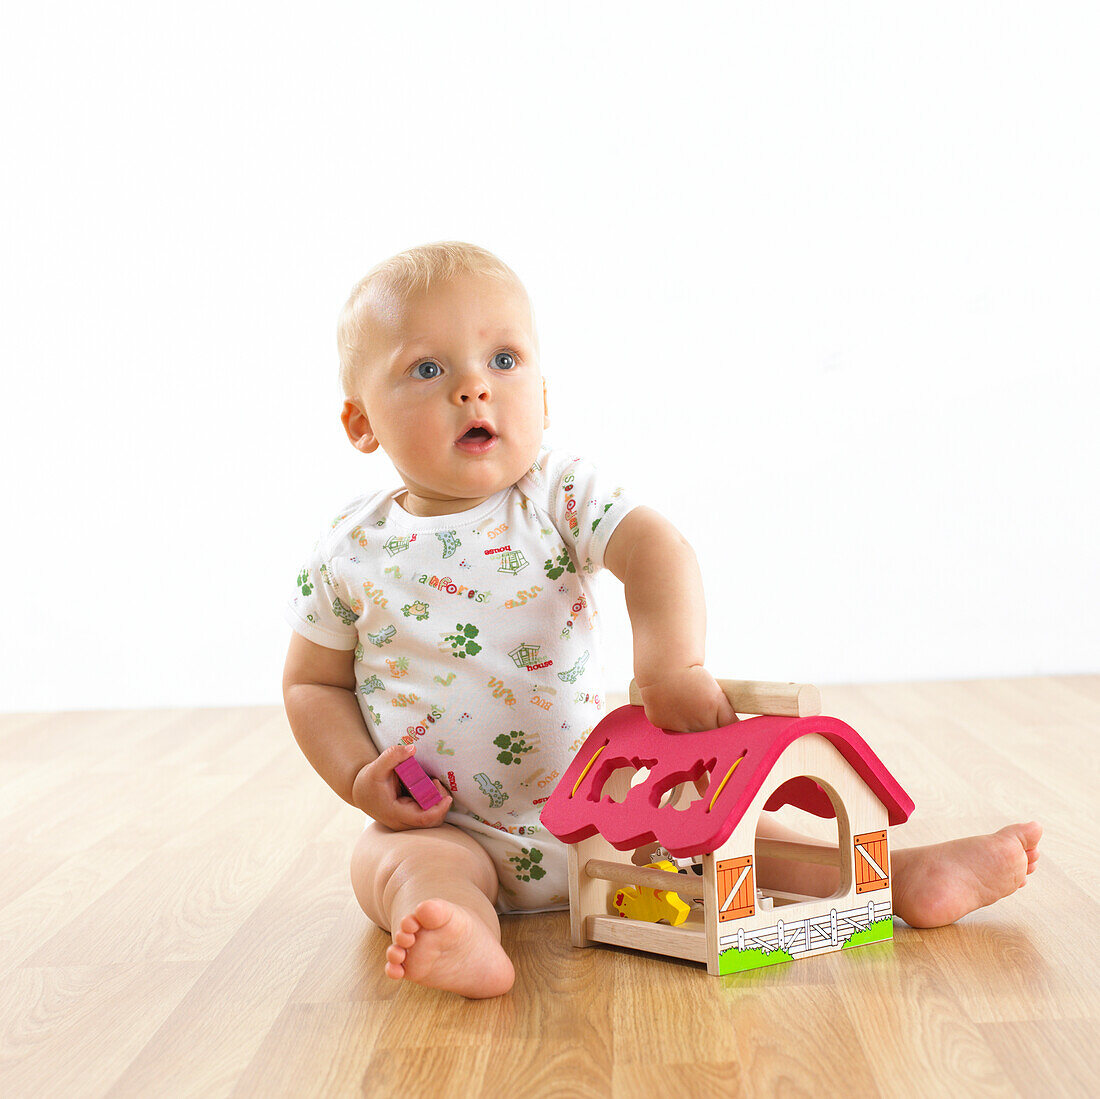 Baby girl sitting on floor playing with farmhouse toy